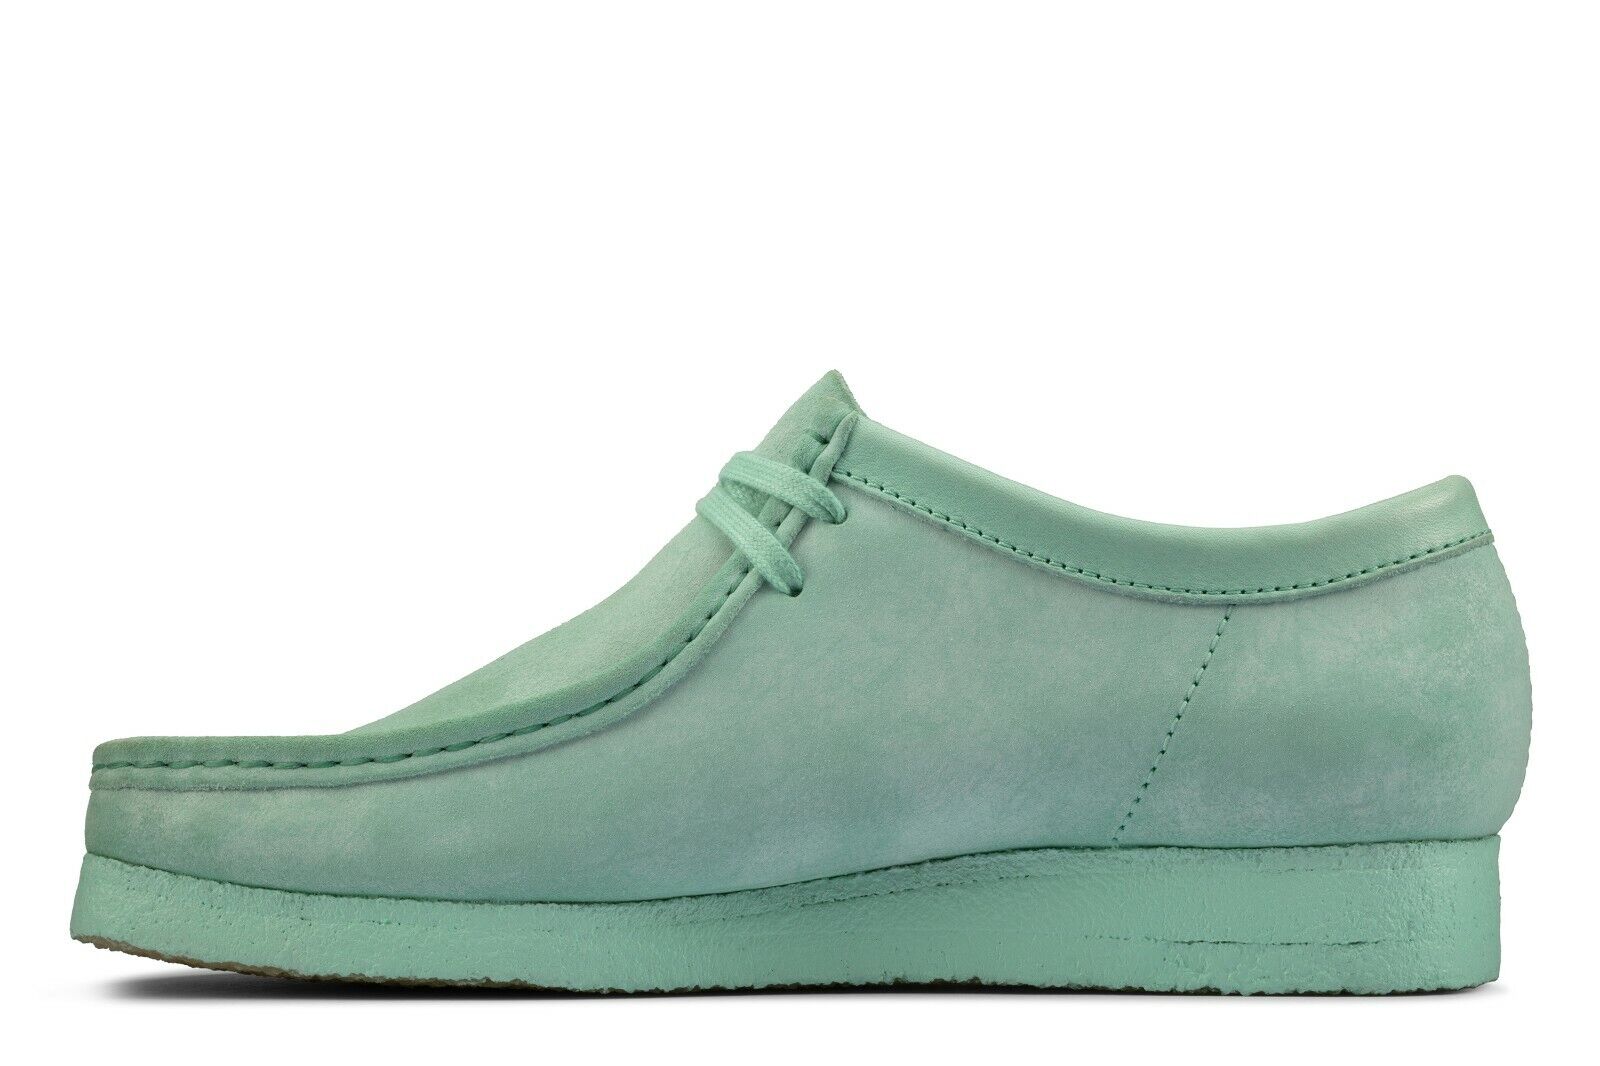 NEW MENS CLARKS ORIGINALS WALLABEE LOW LIMITED EDITION MINT GREEN SUEDE  SHOES